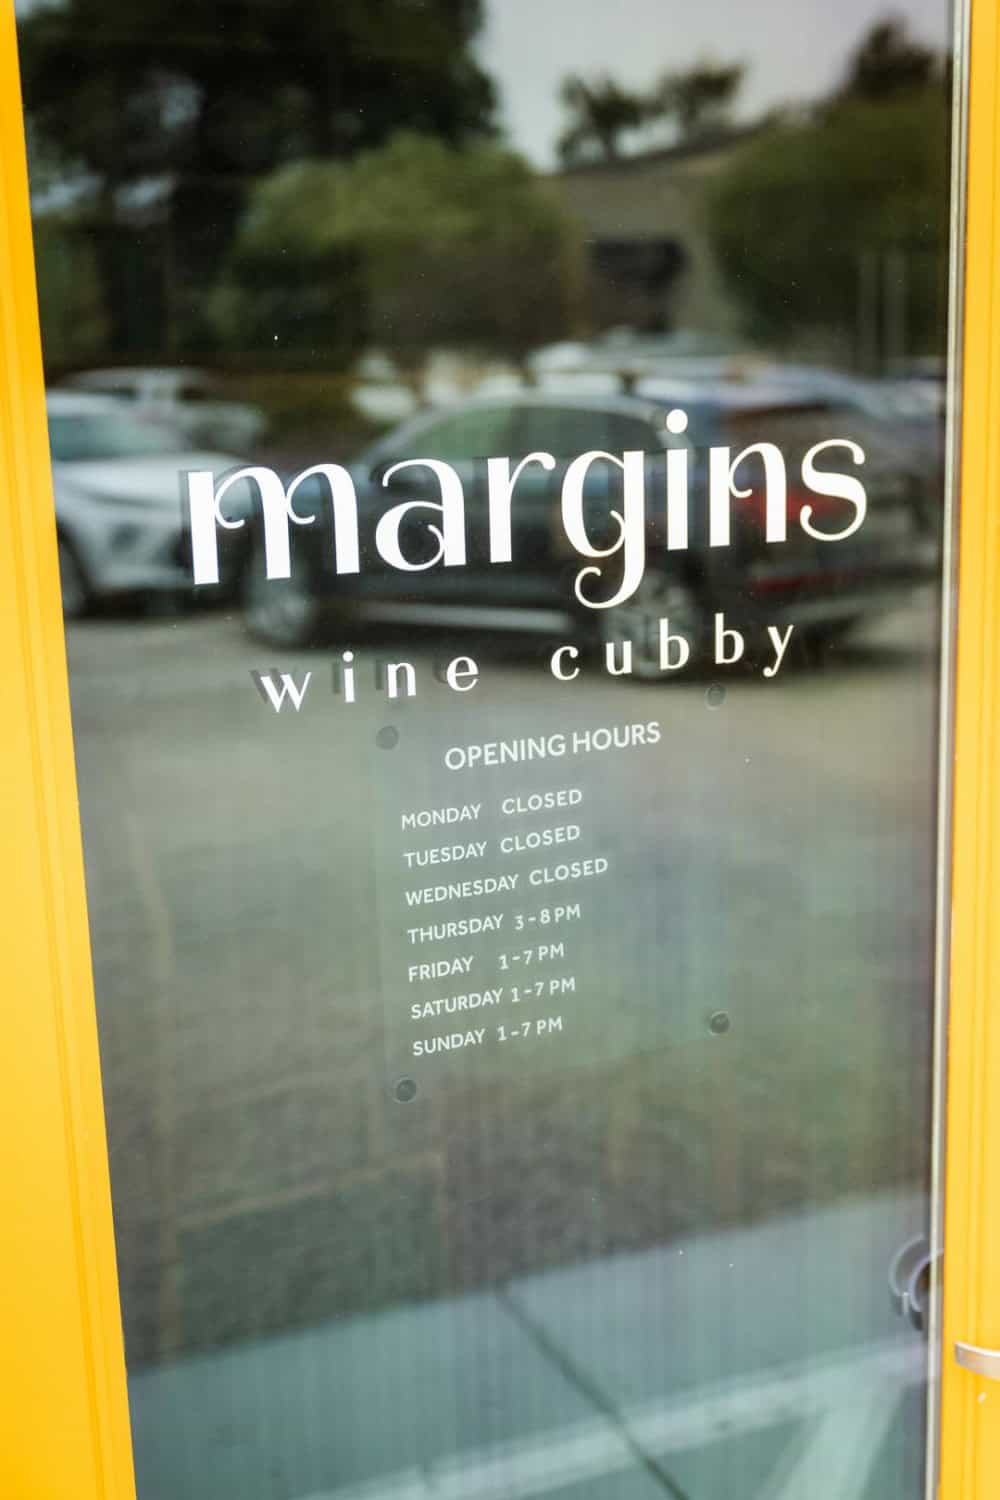 Margins Wine Cubby in downtown Santa Cruz is open for tastings and wine purchases